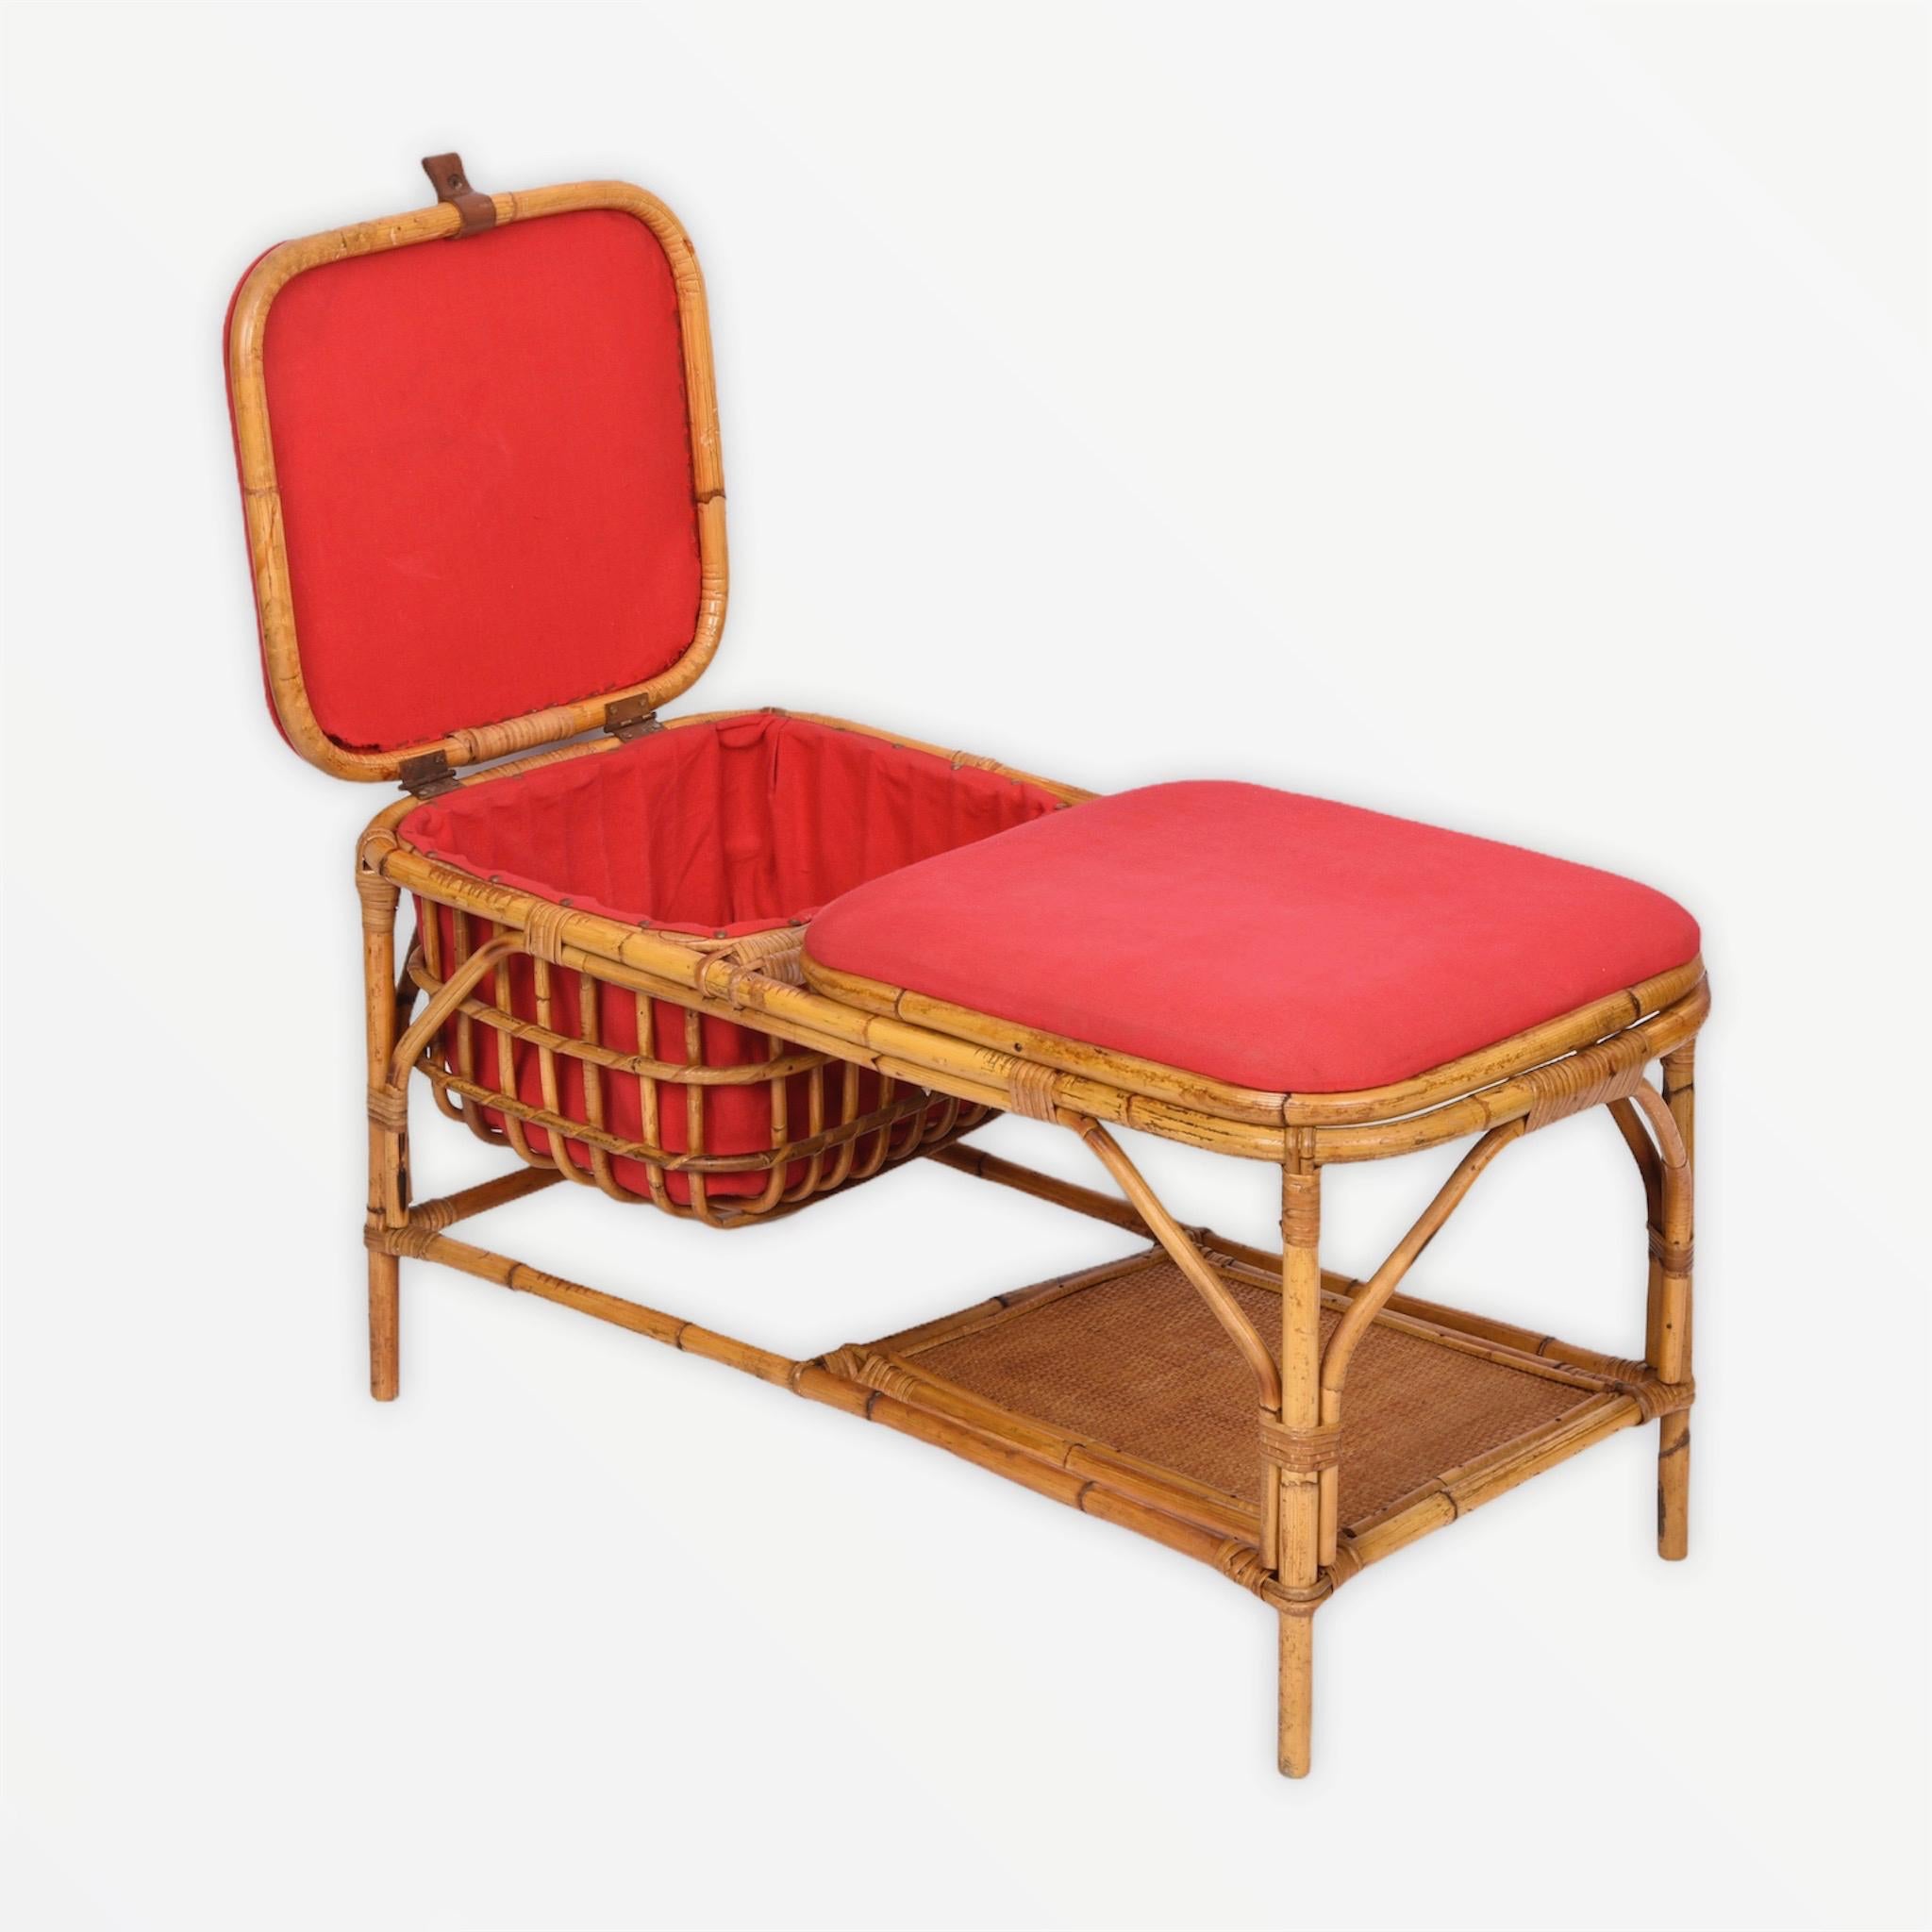 Amazing midcentury bamboo and rattan bench with box case. This fantastic item was produced in Italy during 1950s.

This small bench is quite unique as it has red cushion seats, a solid two levels bamboo structure and a fantastic bamboo box case